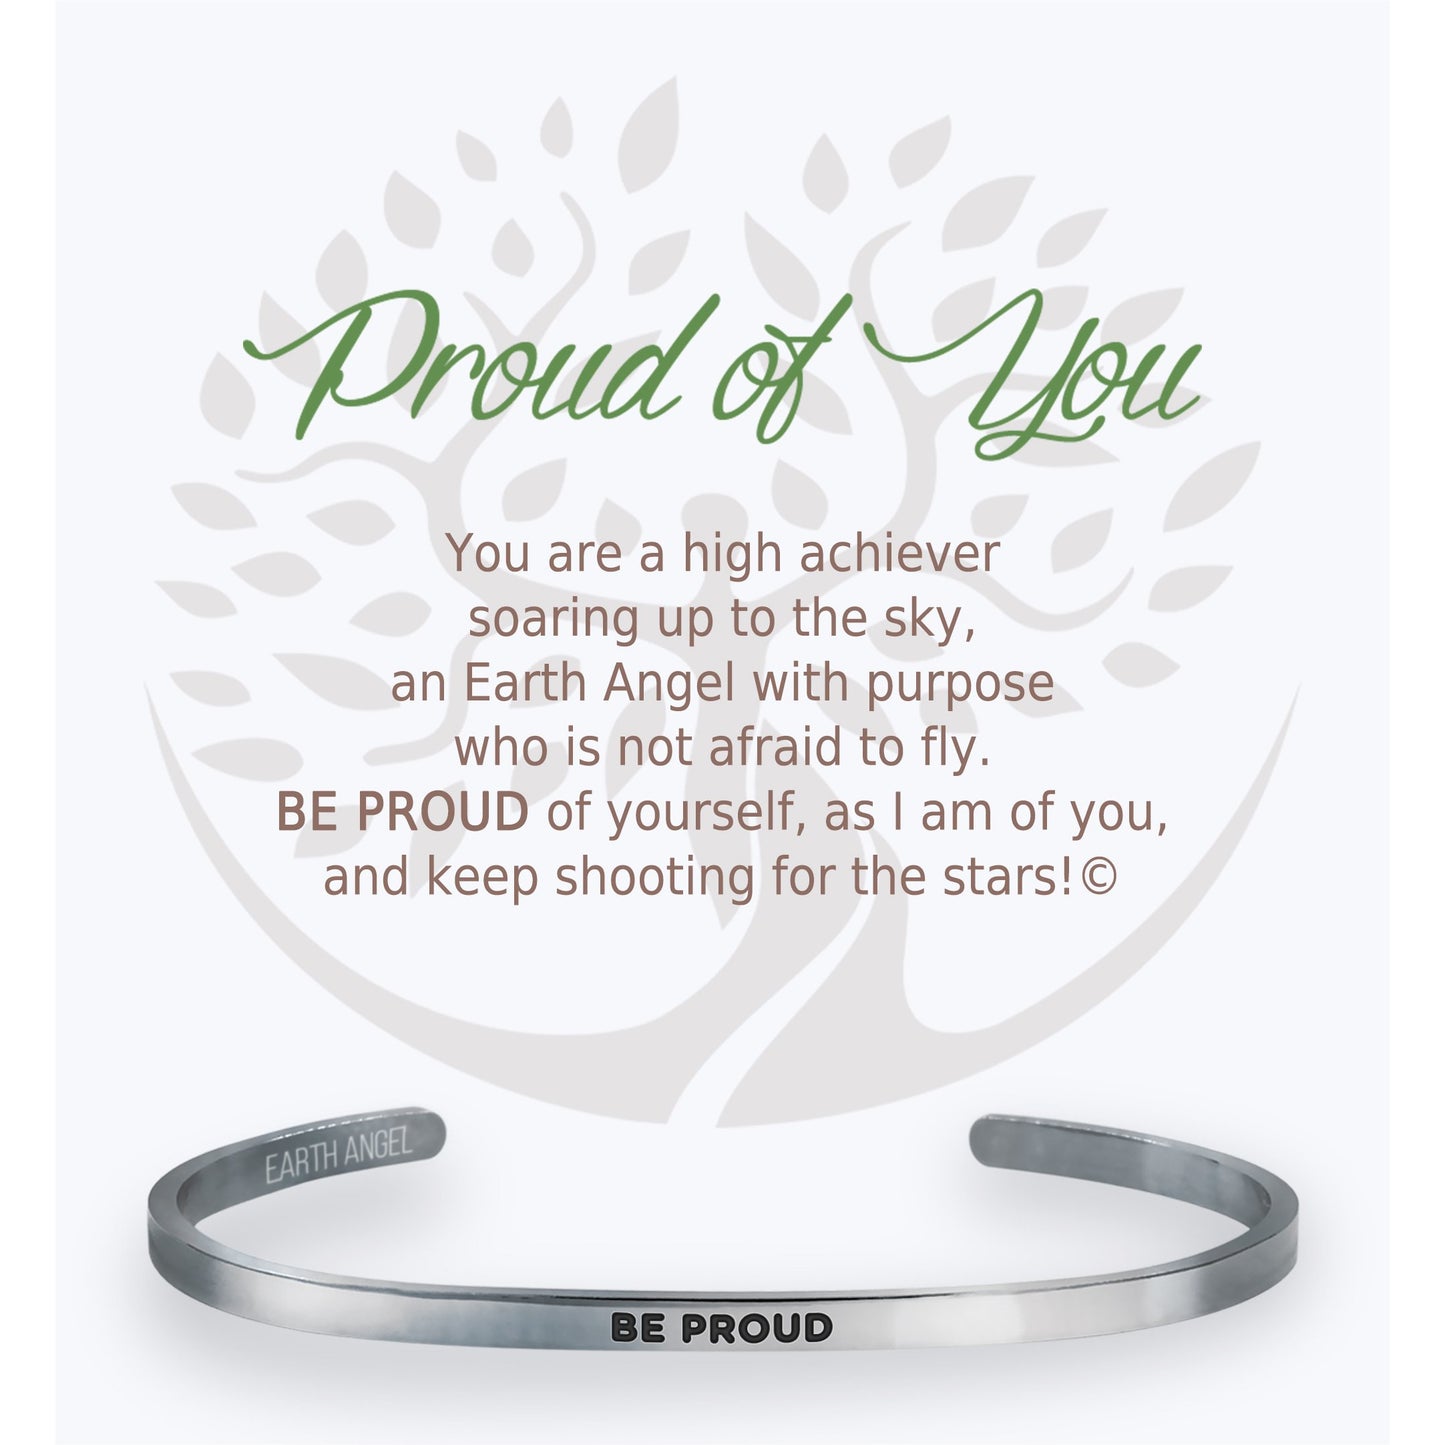 Each cuff bracelet is from a line of high quality stainless-steel. Our bracelets each include a gift box and card of caring instructions making them the perfect present for all “The Angels of Our Lives”.  Choose from:  Mom, Sister, Friend, Teacher, Daughter, Grand-daughter, Grandma, Strength, Nurse, Birthday, Love, Proud of You